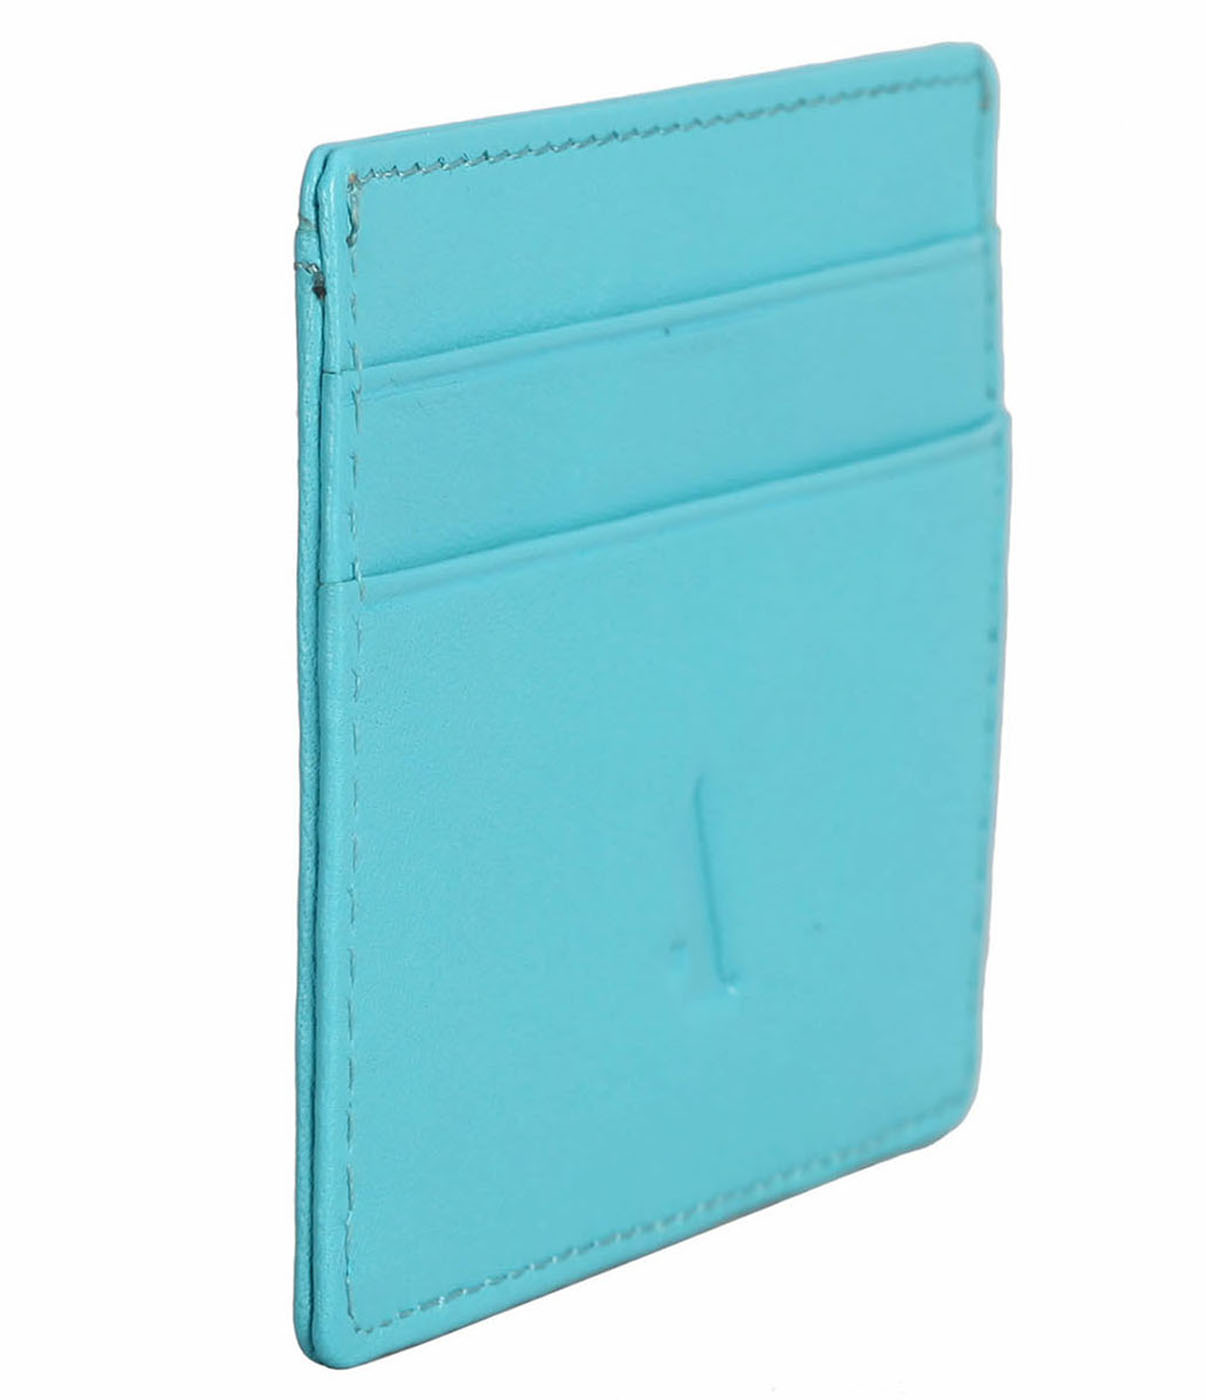 W271--Credit card holder with transparent slot in Genuine leather - Turquoise